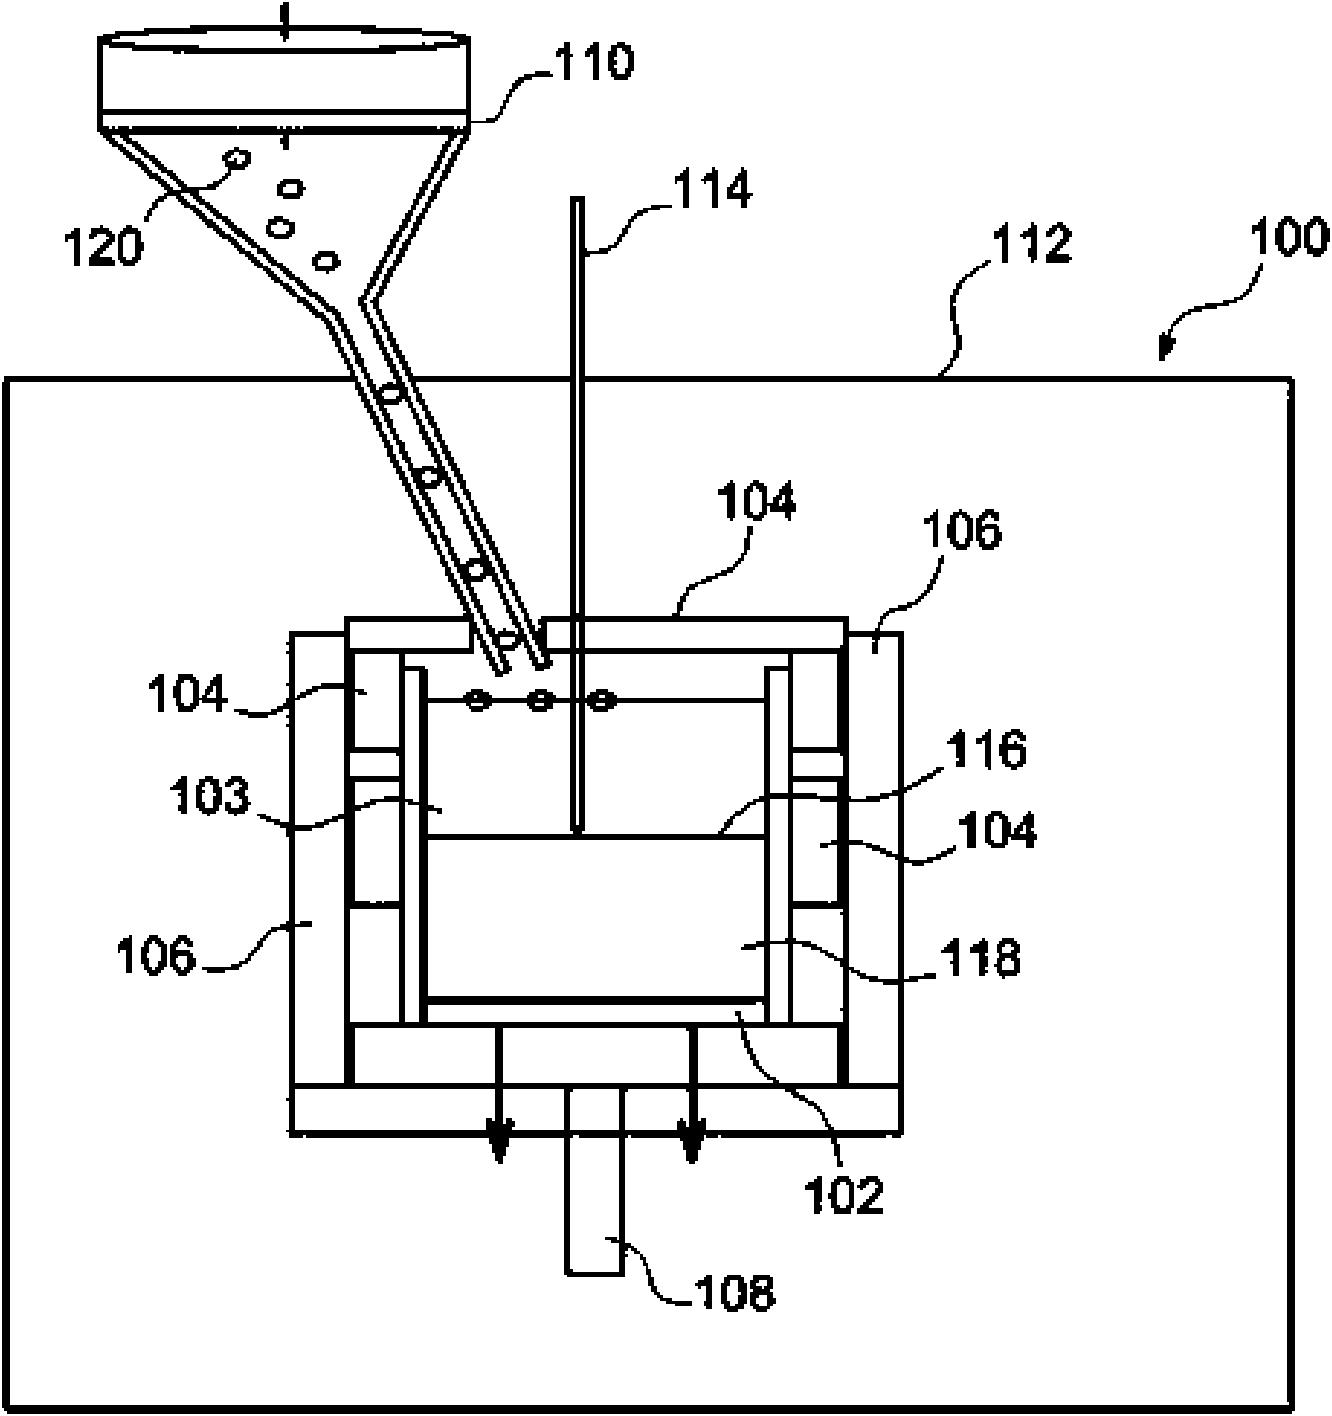 Method For Solidifying A Semiconductor With Adding Charges Of A Doped Semiconductor During The Crystallisation